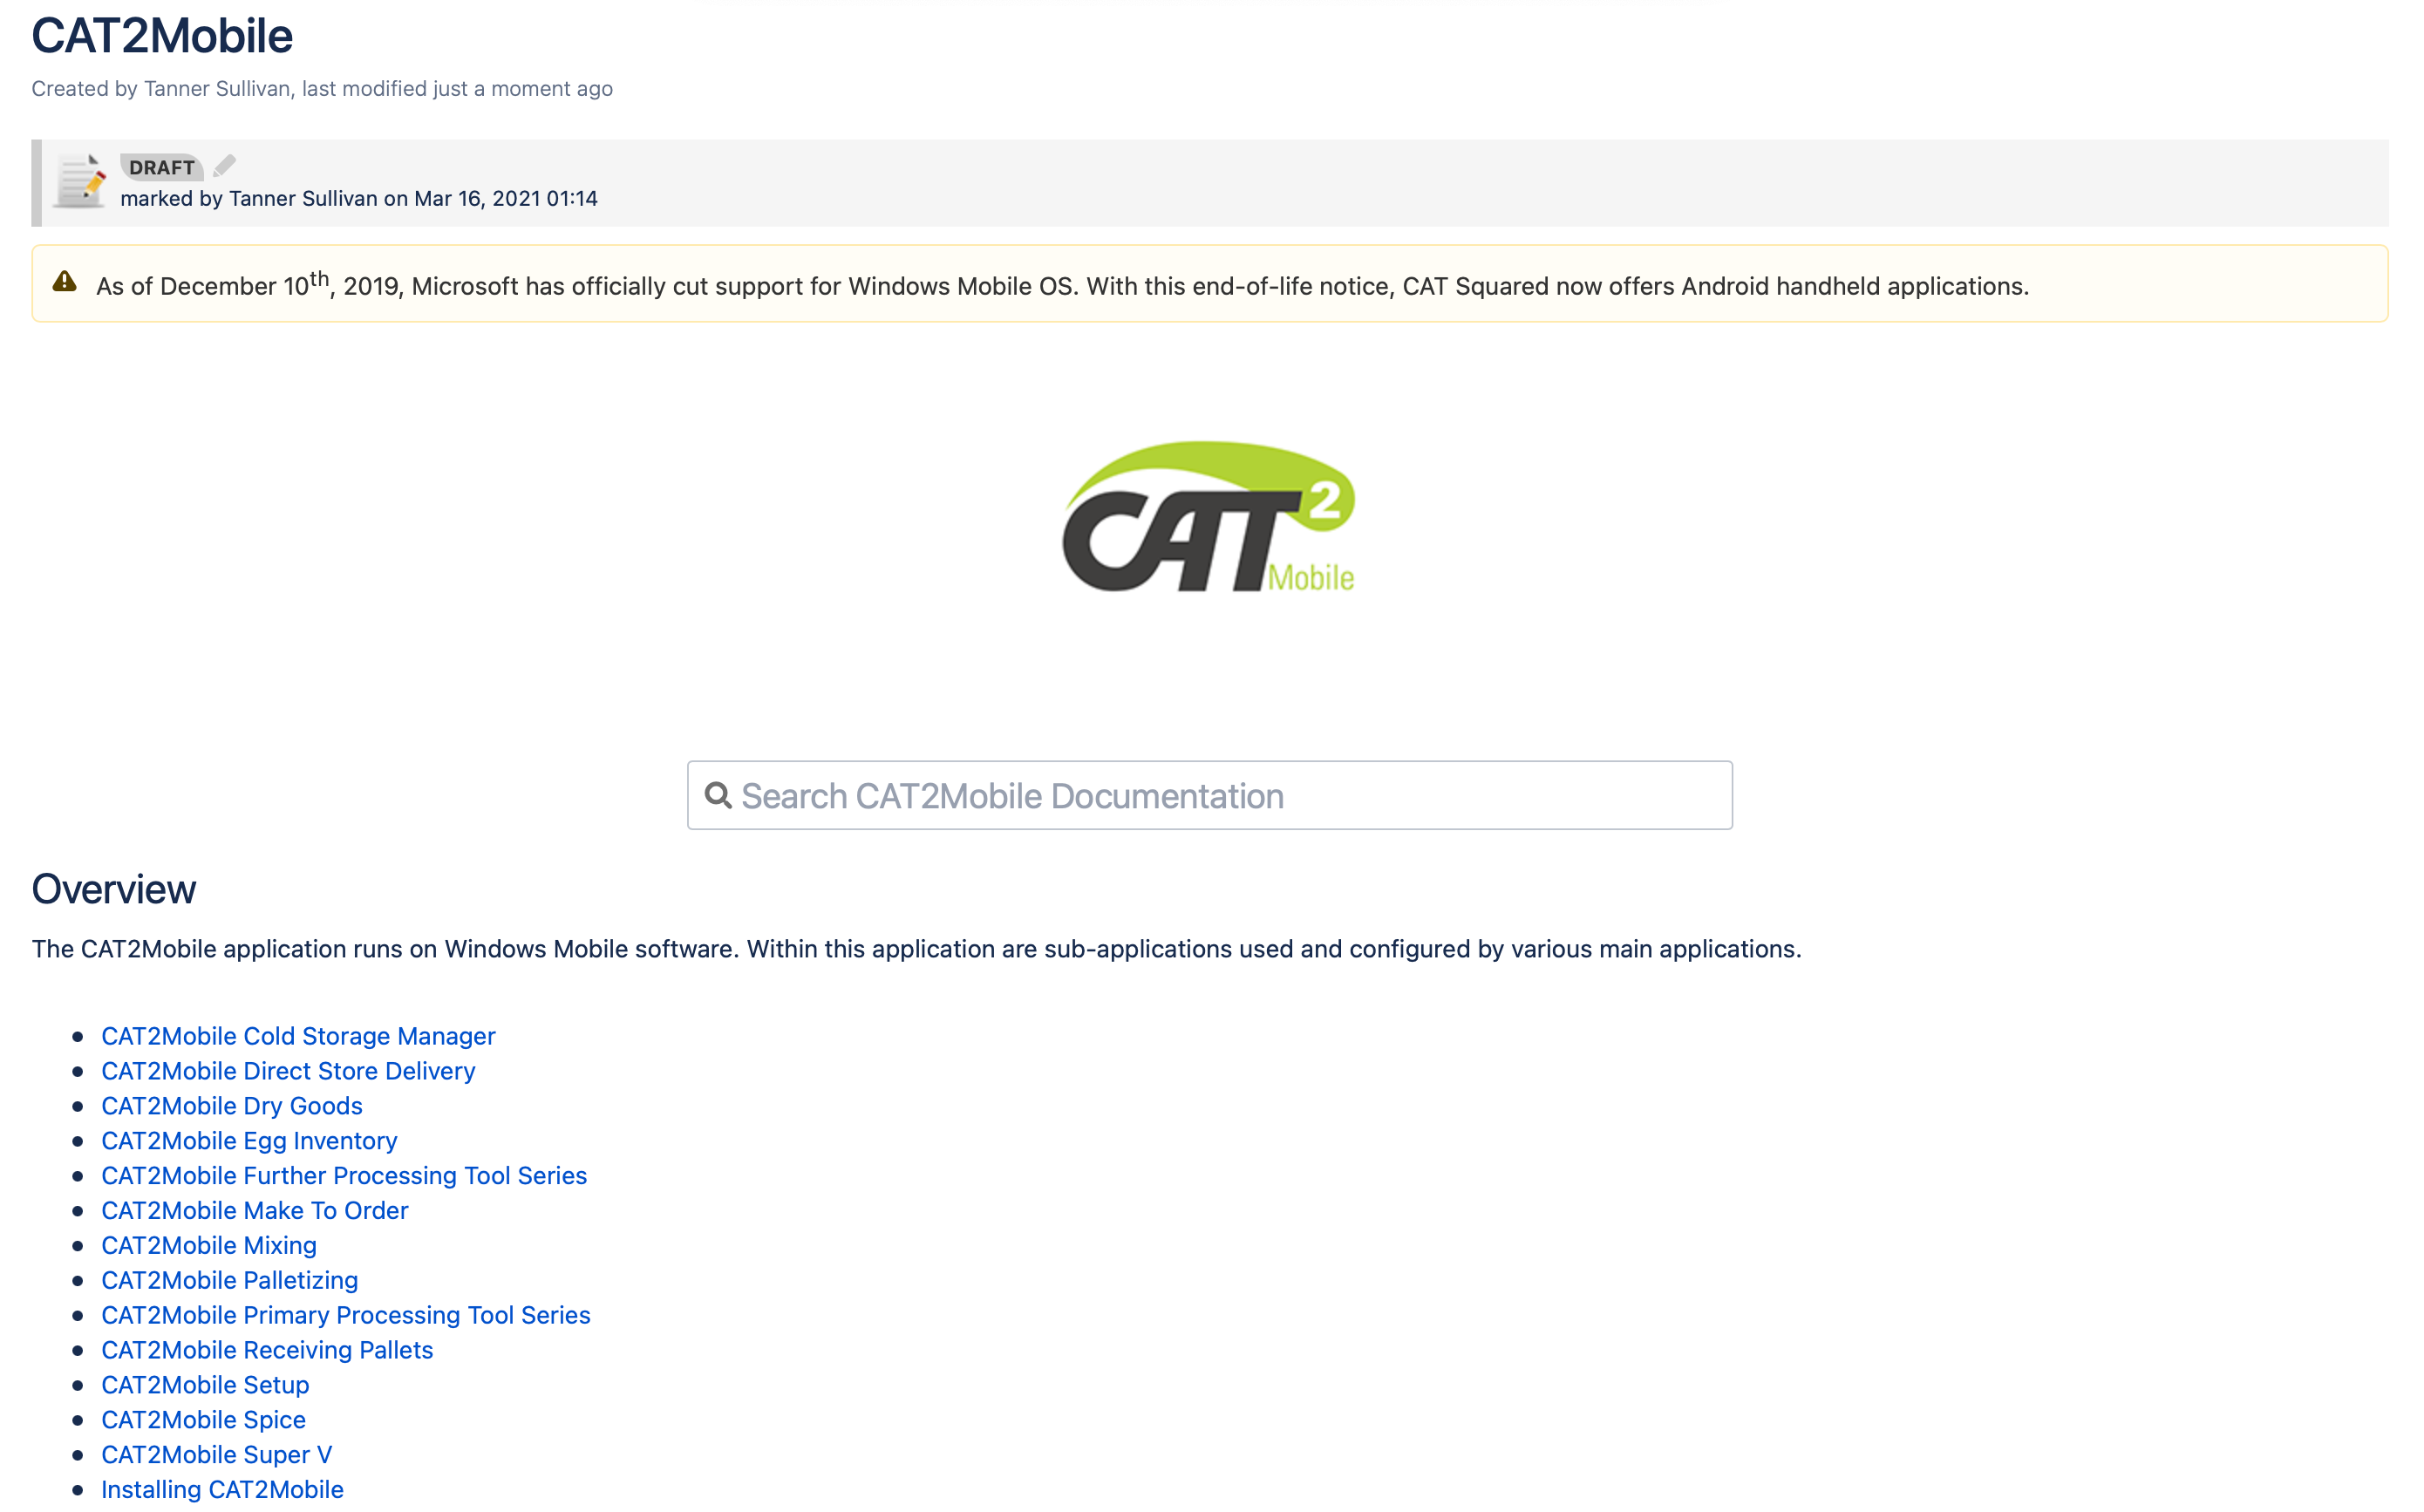 Screenshot of Confluence Documentation Space with CAT2 logo and search bar.